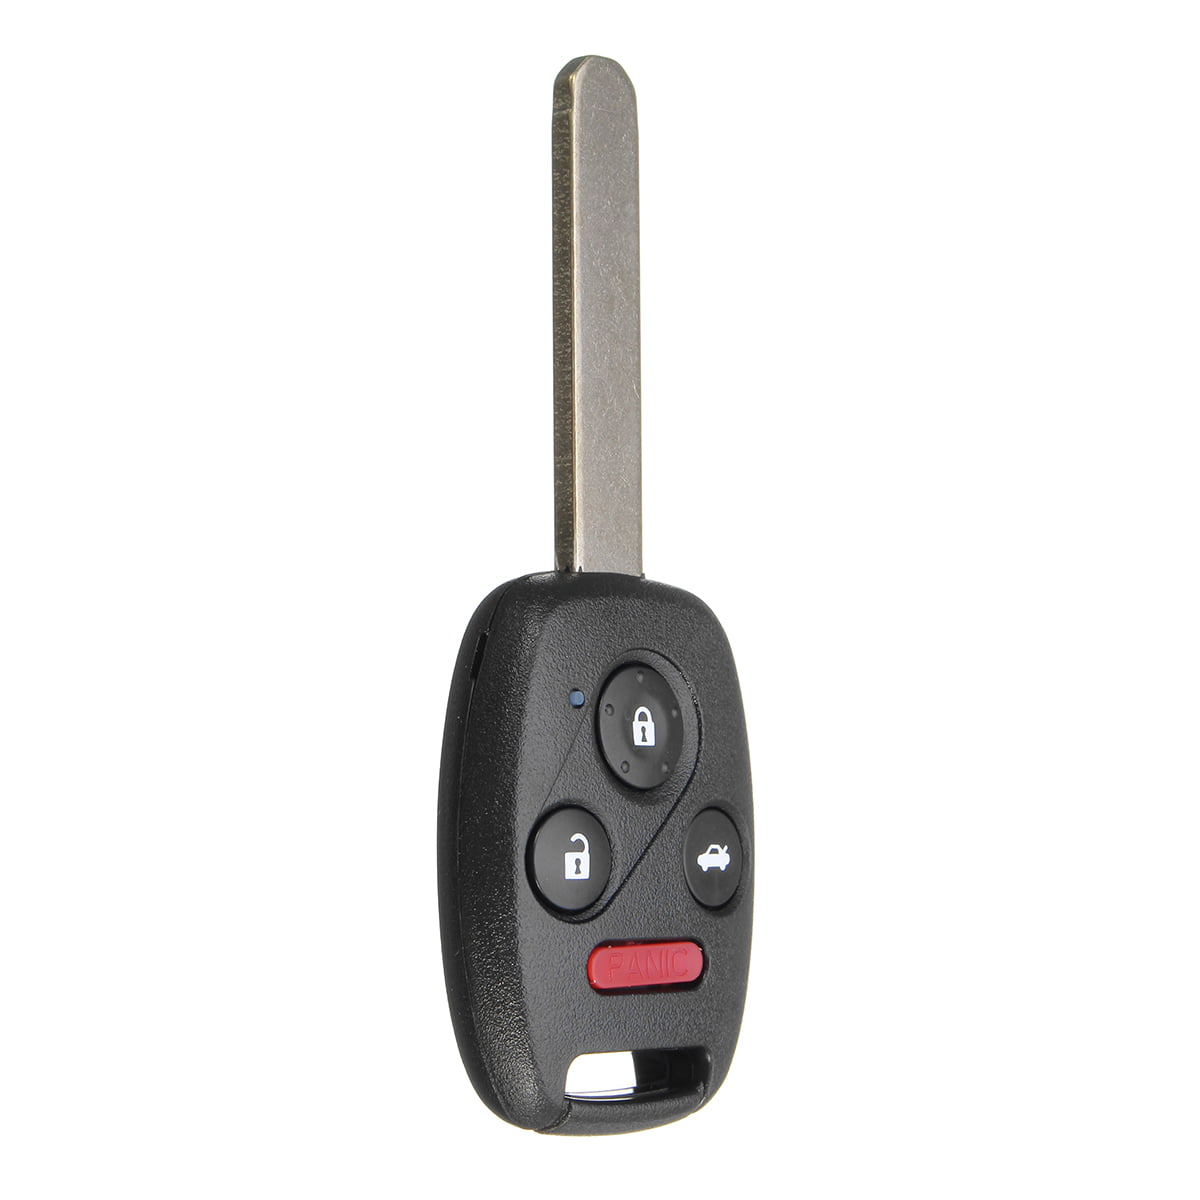 Remote Key Fob Keyless Entry ID46 Uncut Replacement For Honda Pilot #KR55WK49308 